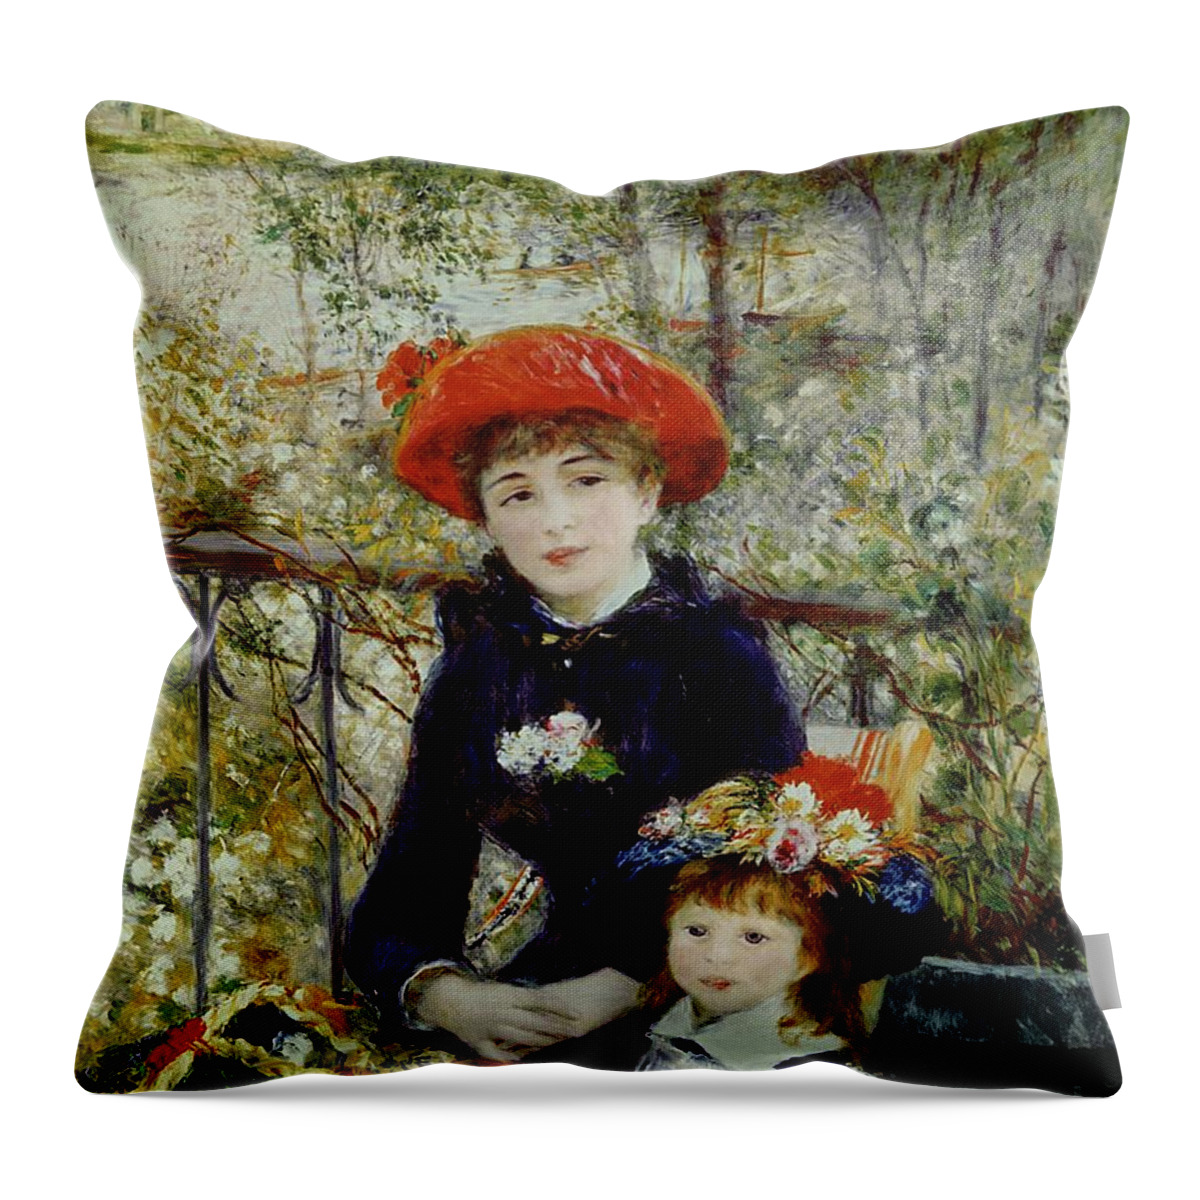 Two Throw Pillow featuring the painting Two Sisters by Pierre Auguste Renoir